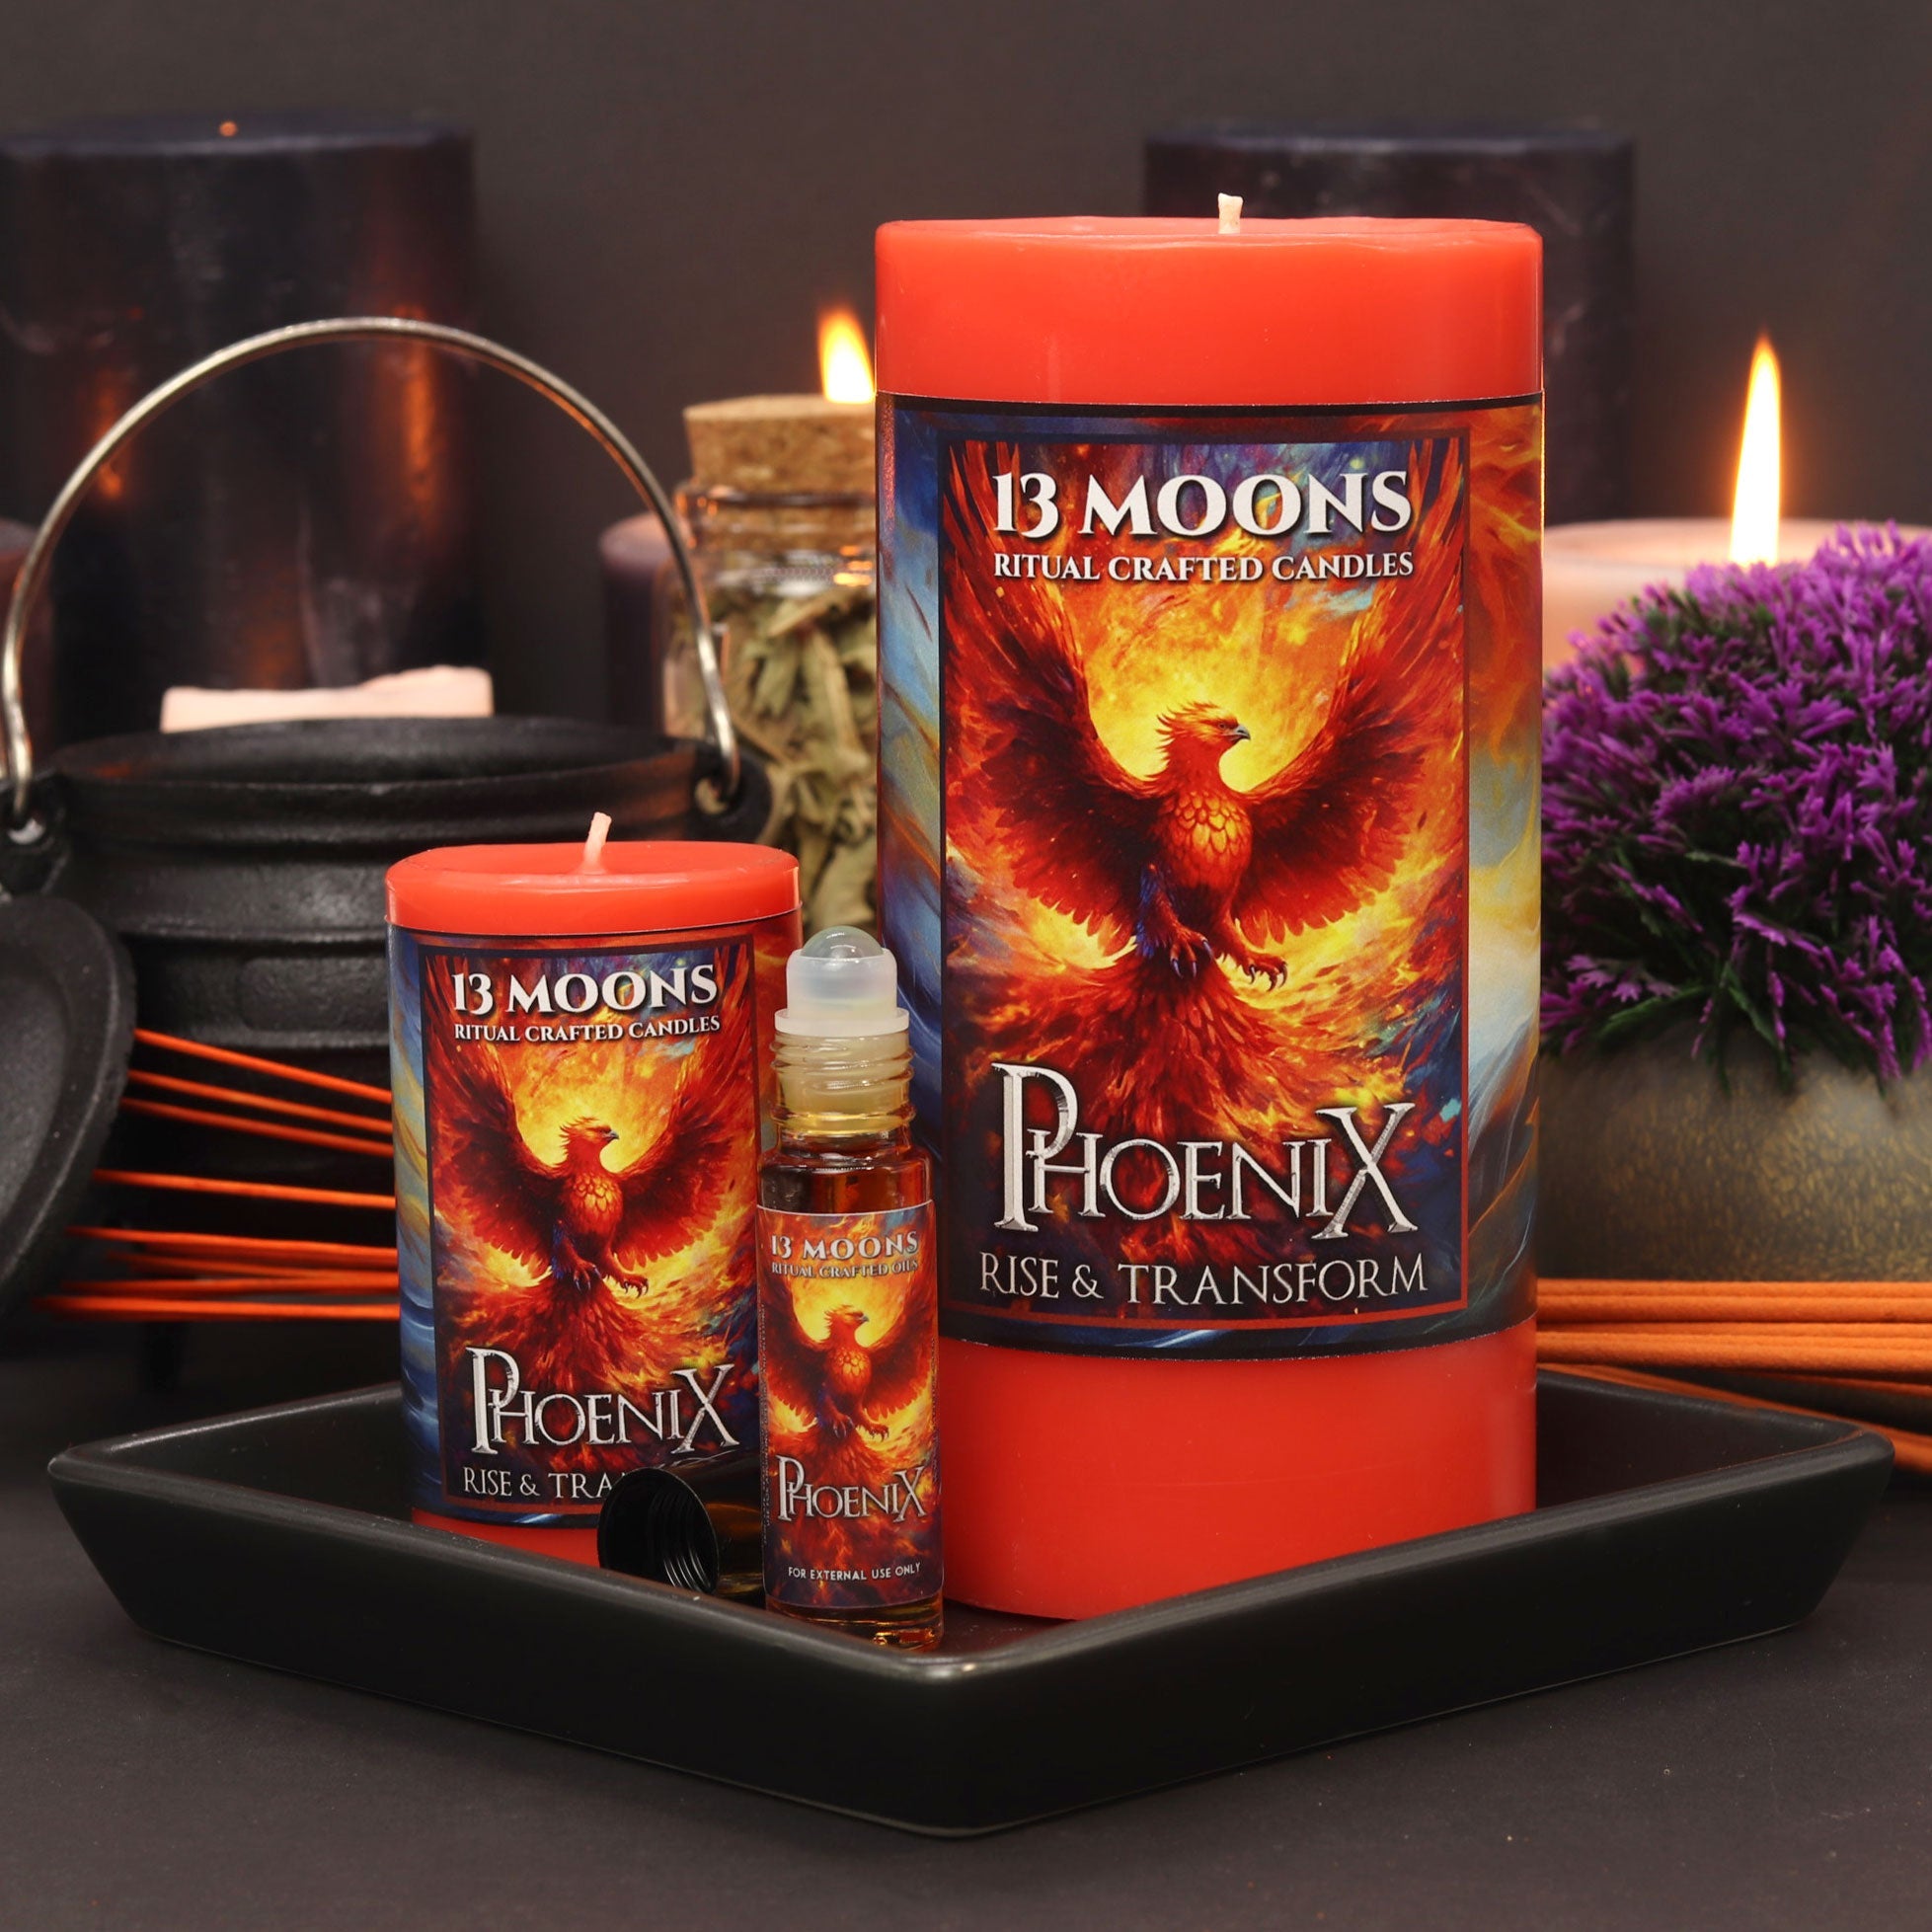 Dragon's Blood Ritual Crafted Oil by 13 Moons